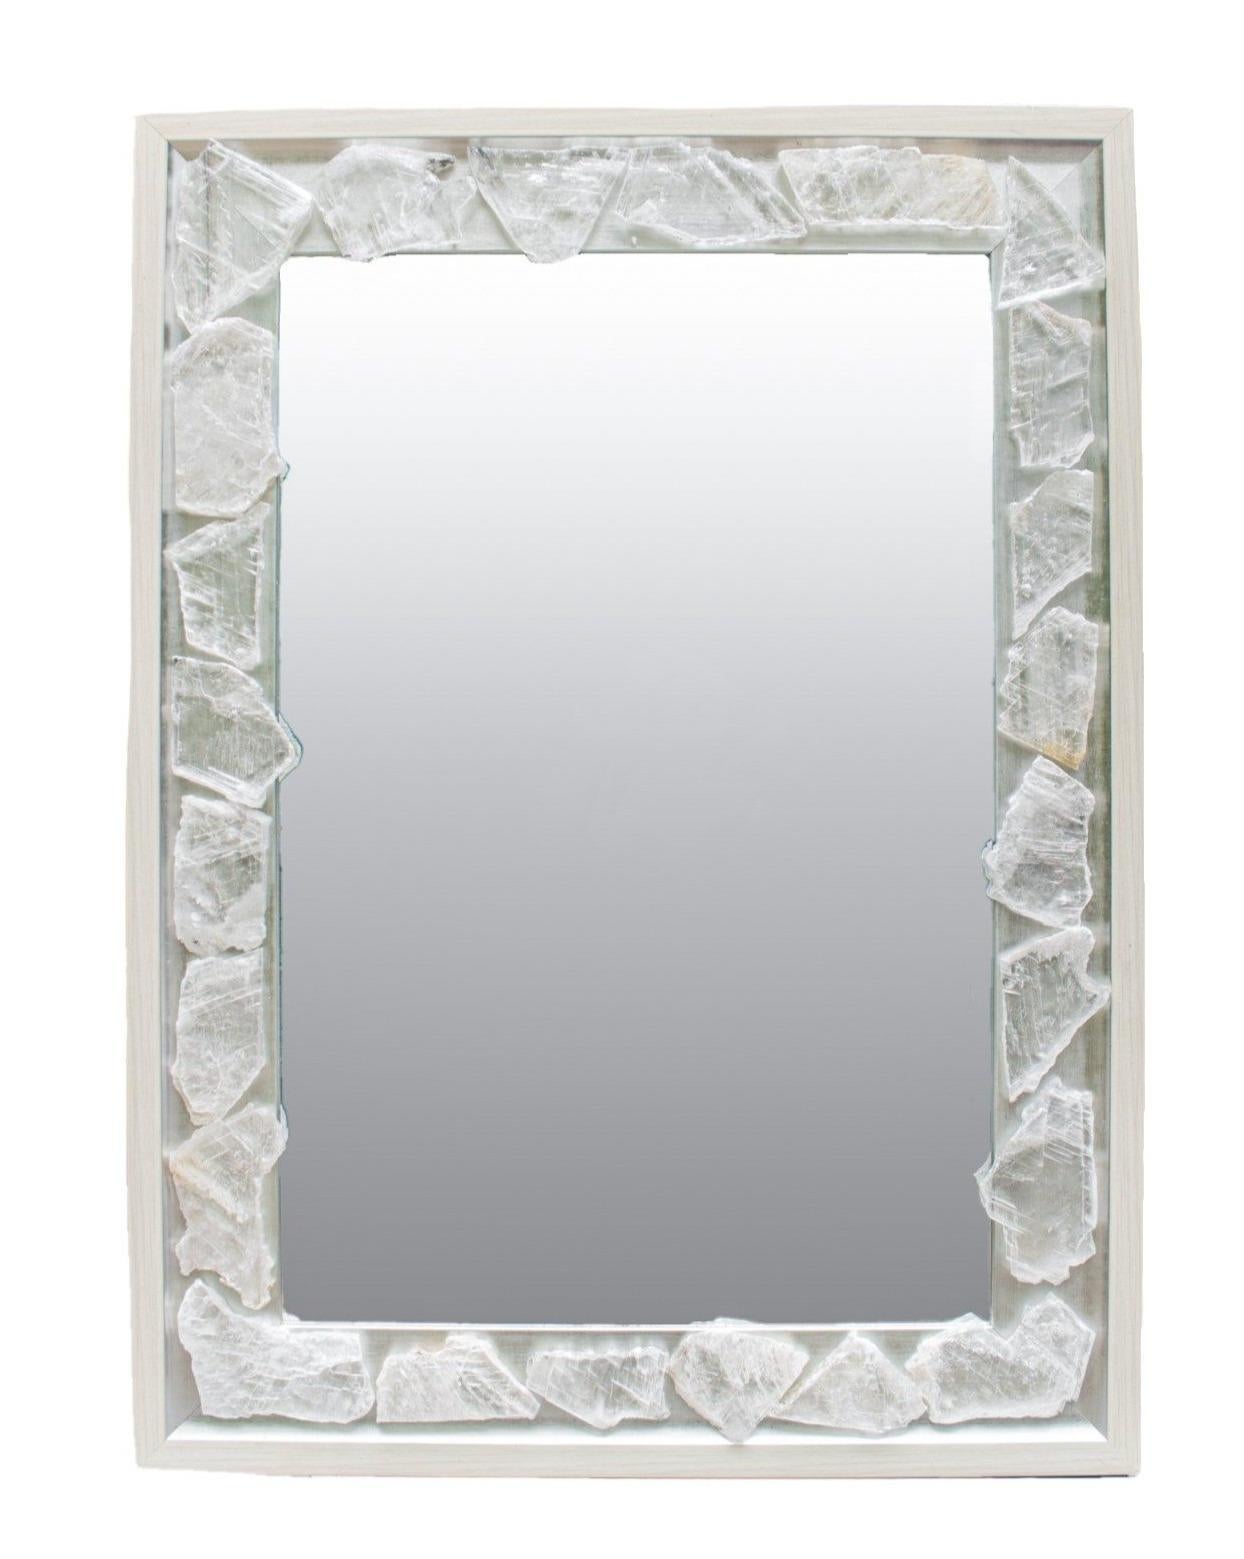 Selenite mirror with a silver and cream frame by Interi.

The mirror is adorned with selenite slices. Selenite is a crystallized form of Gypsum. It is comprised of striations which look like optical light fibers. Although selenite comes in many